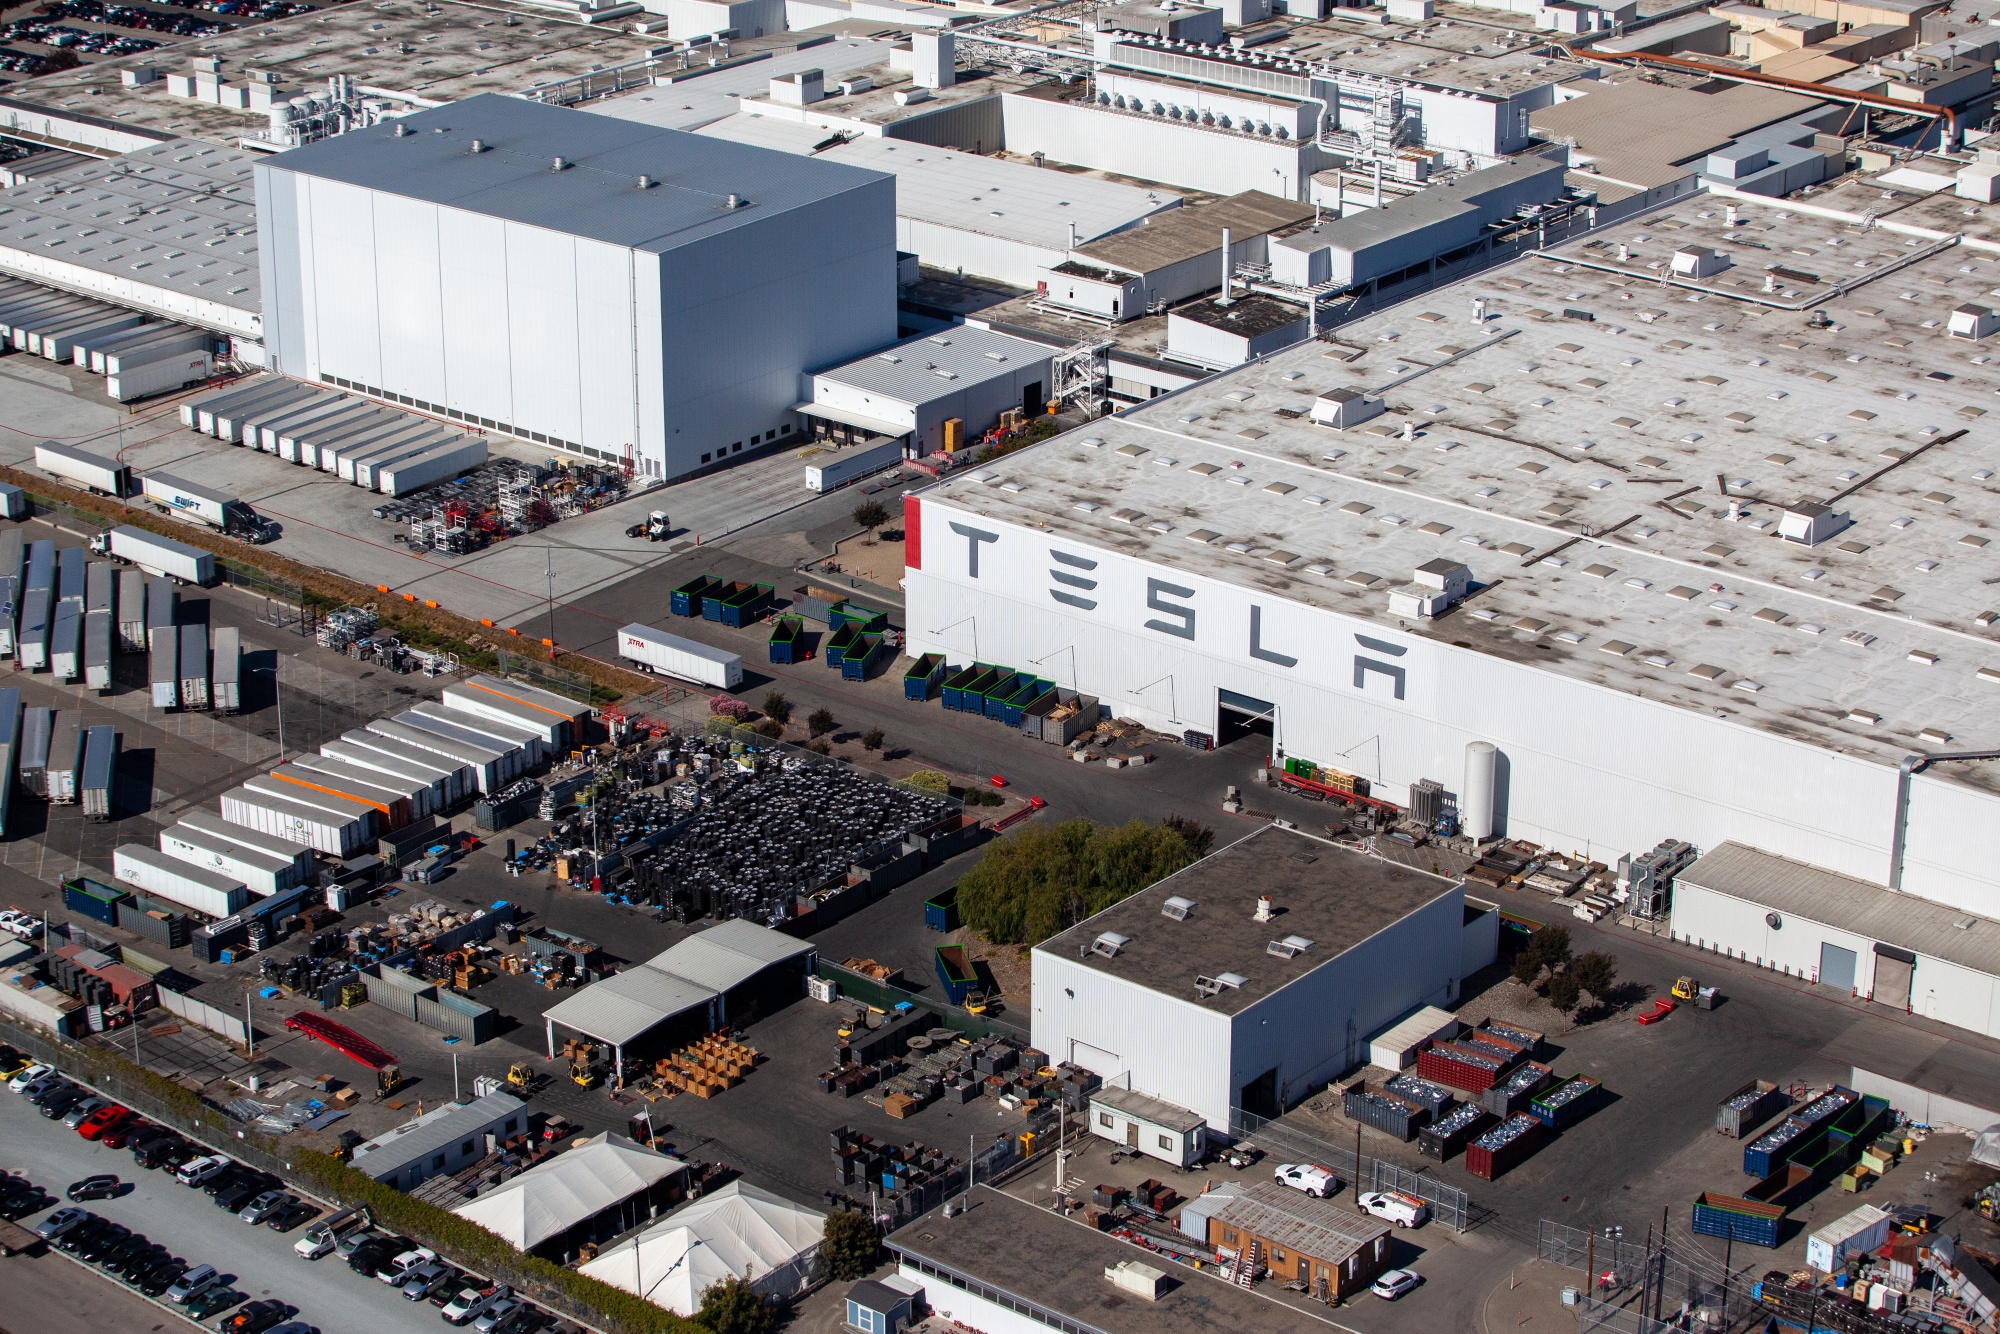 Tesla’s assembly plant in Fremont, California.